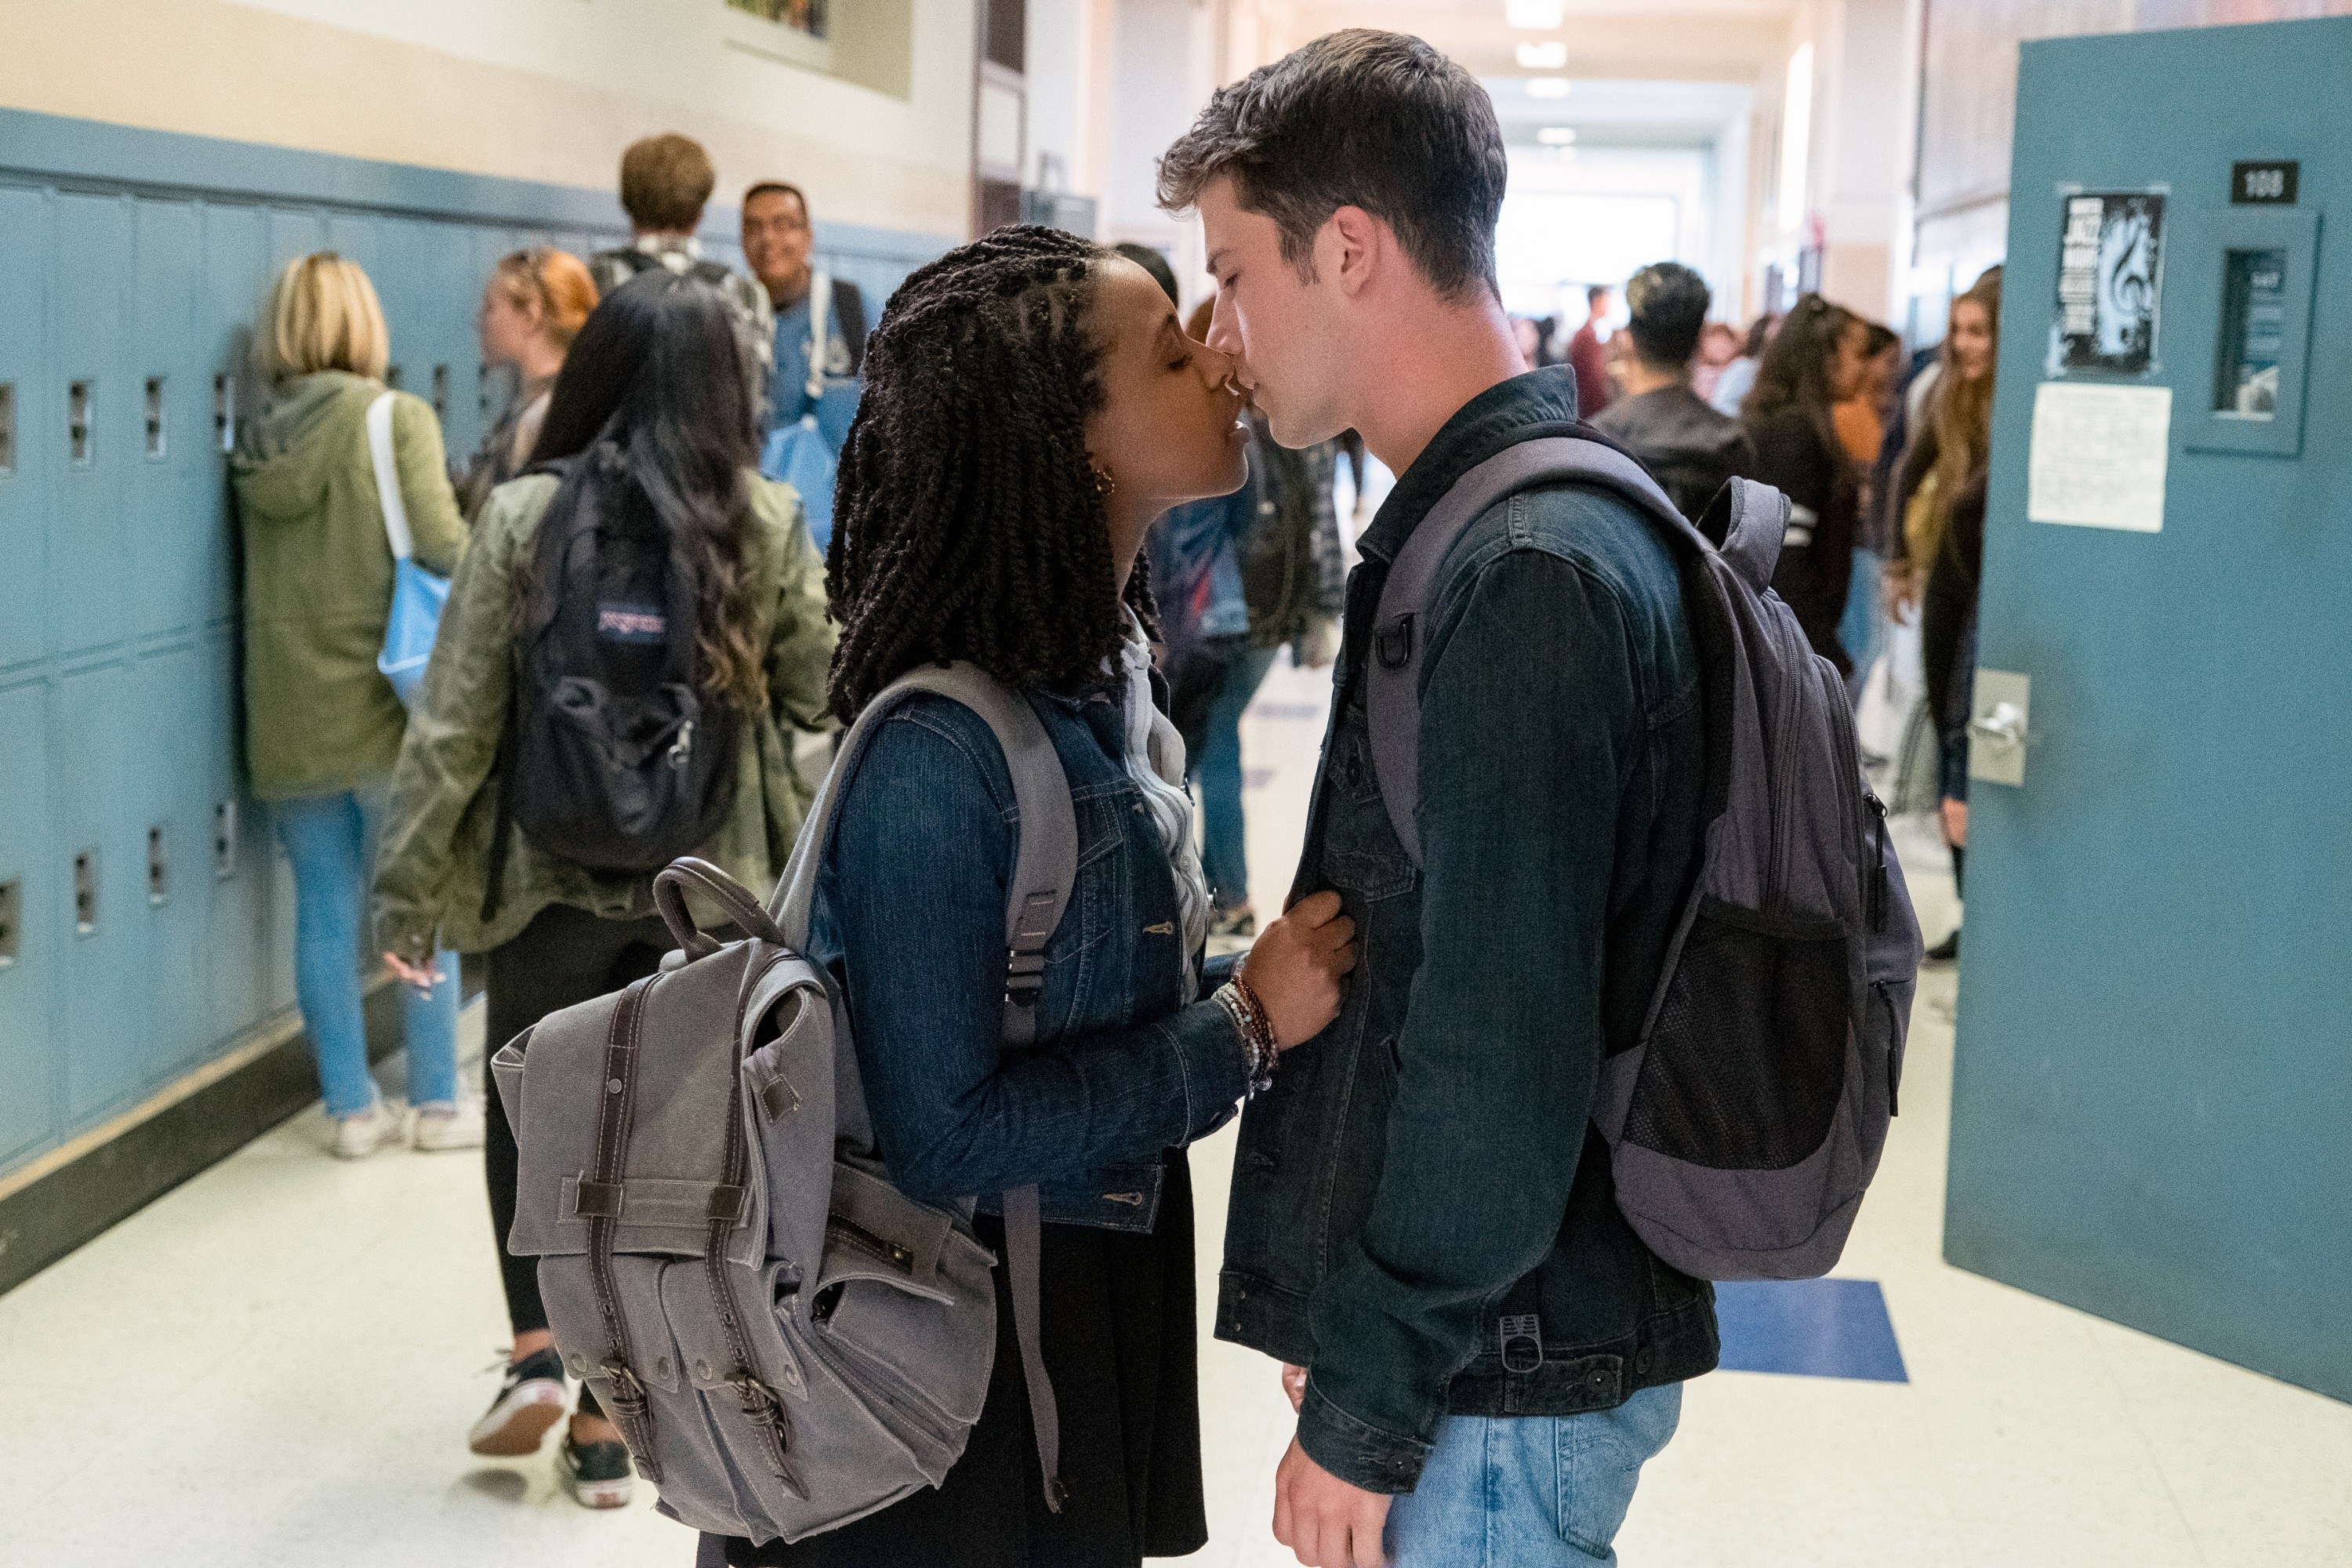 Ani and Clay kissing in the school hallway